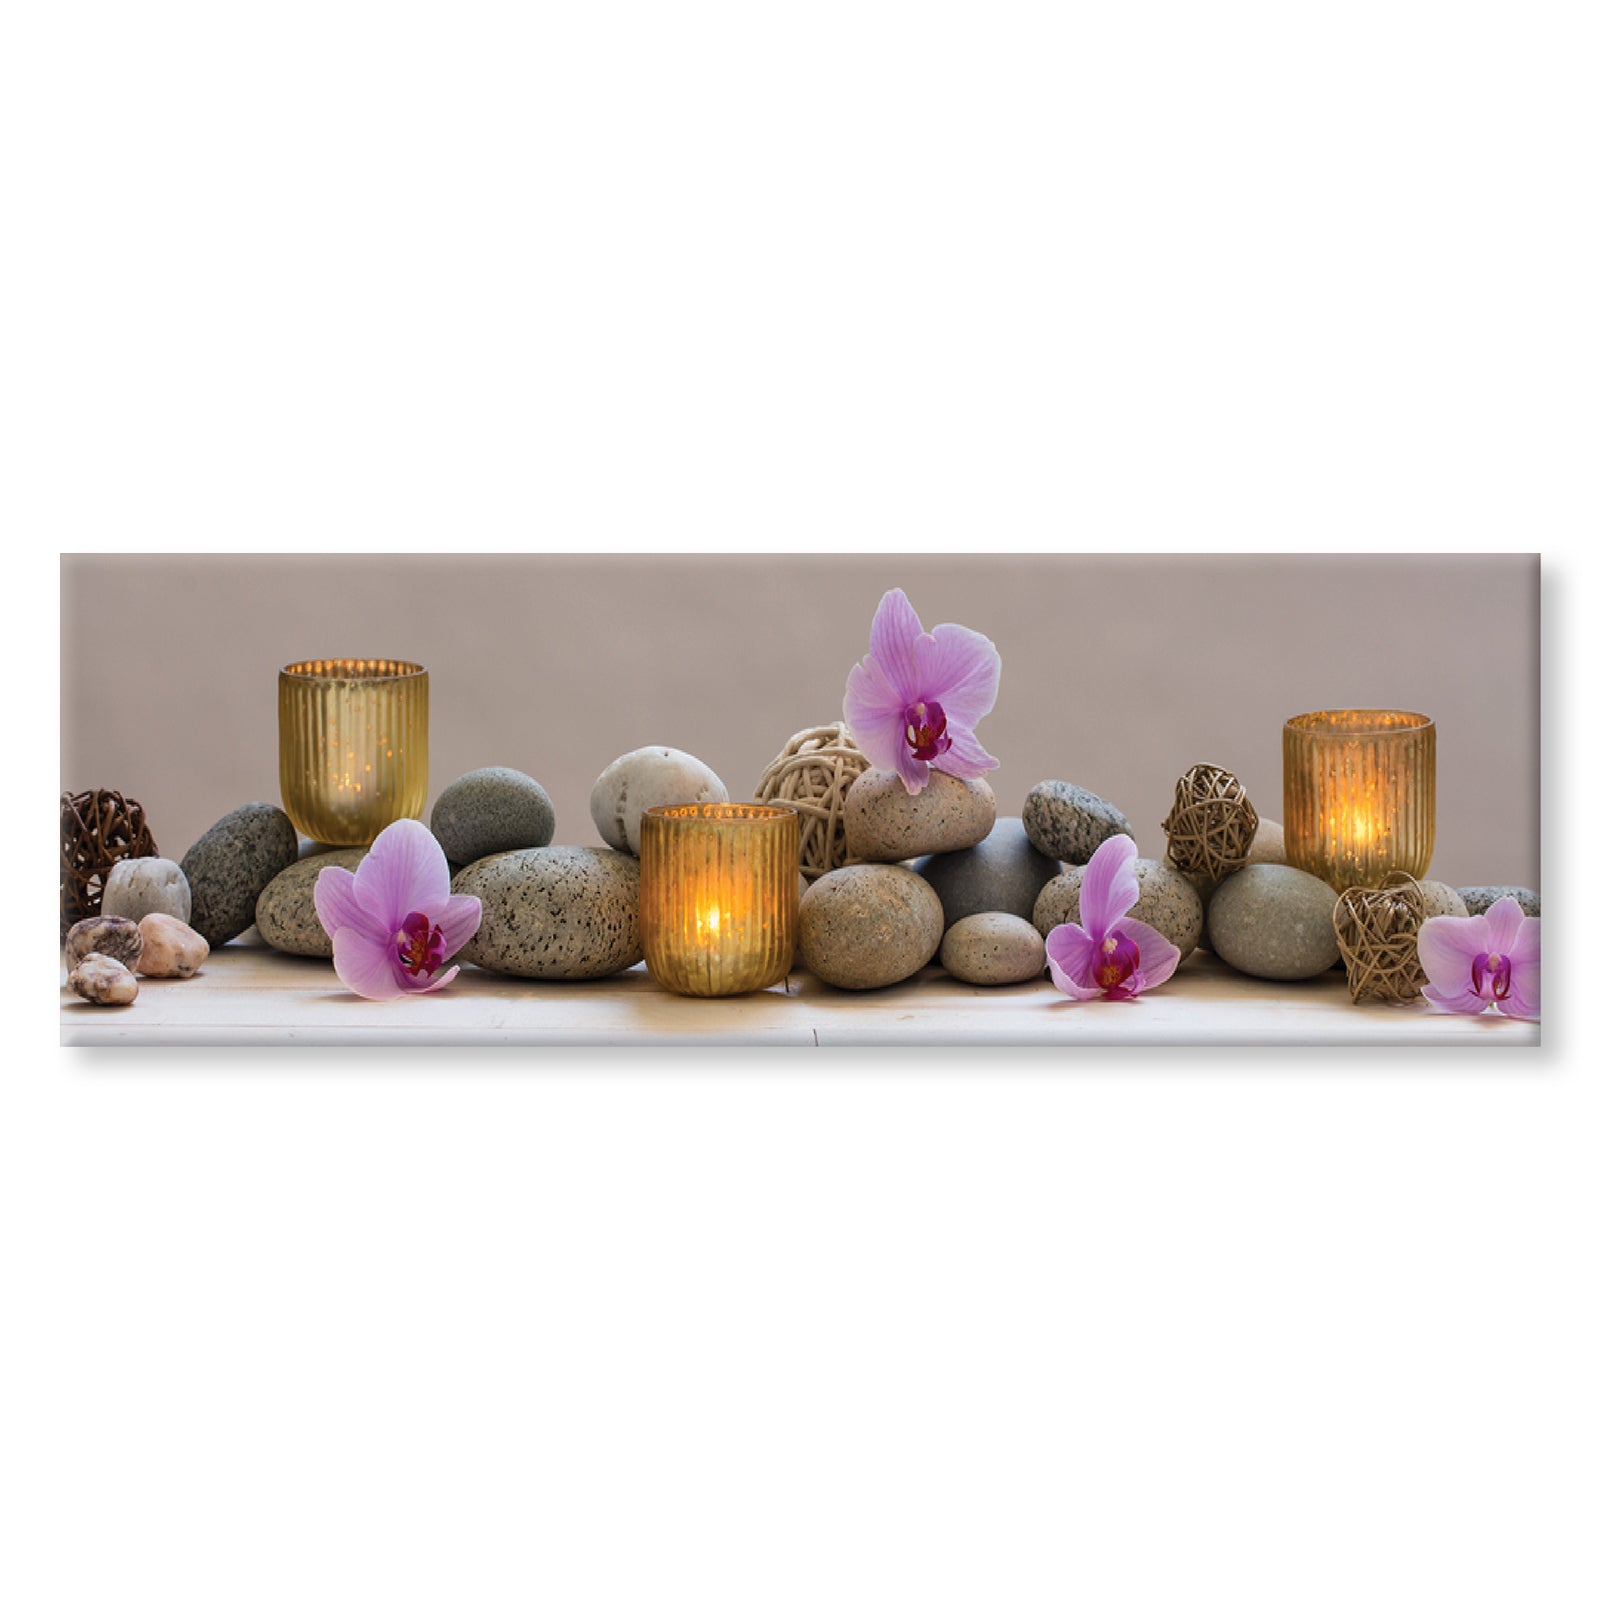 Panoramic Canvas Stones, Flowers & Candles High Quality 100% Australian made wall Canvas Print ready to hang